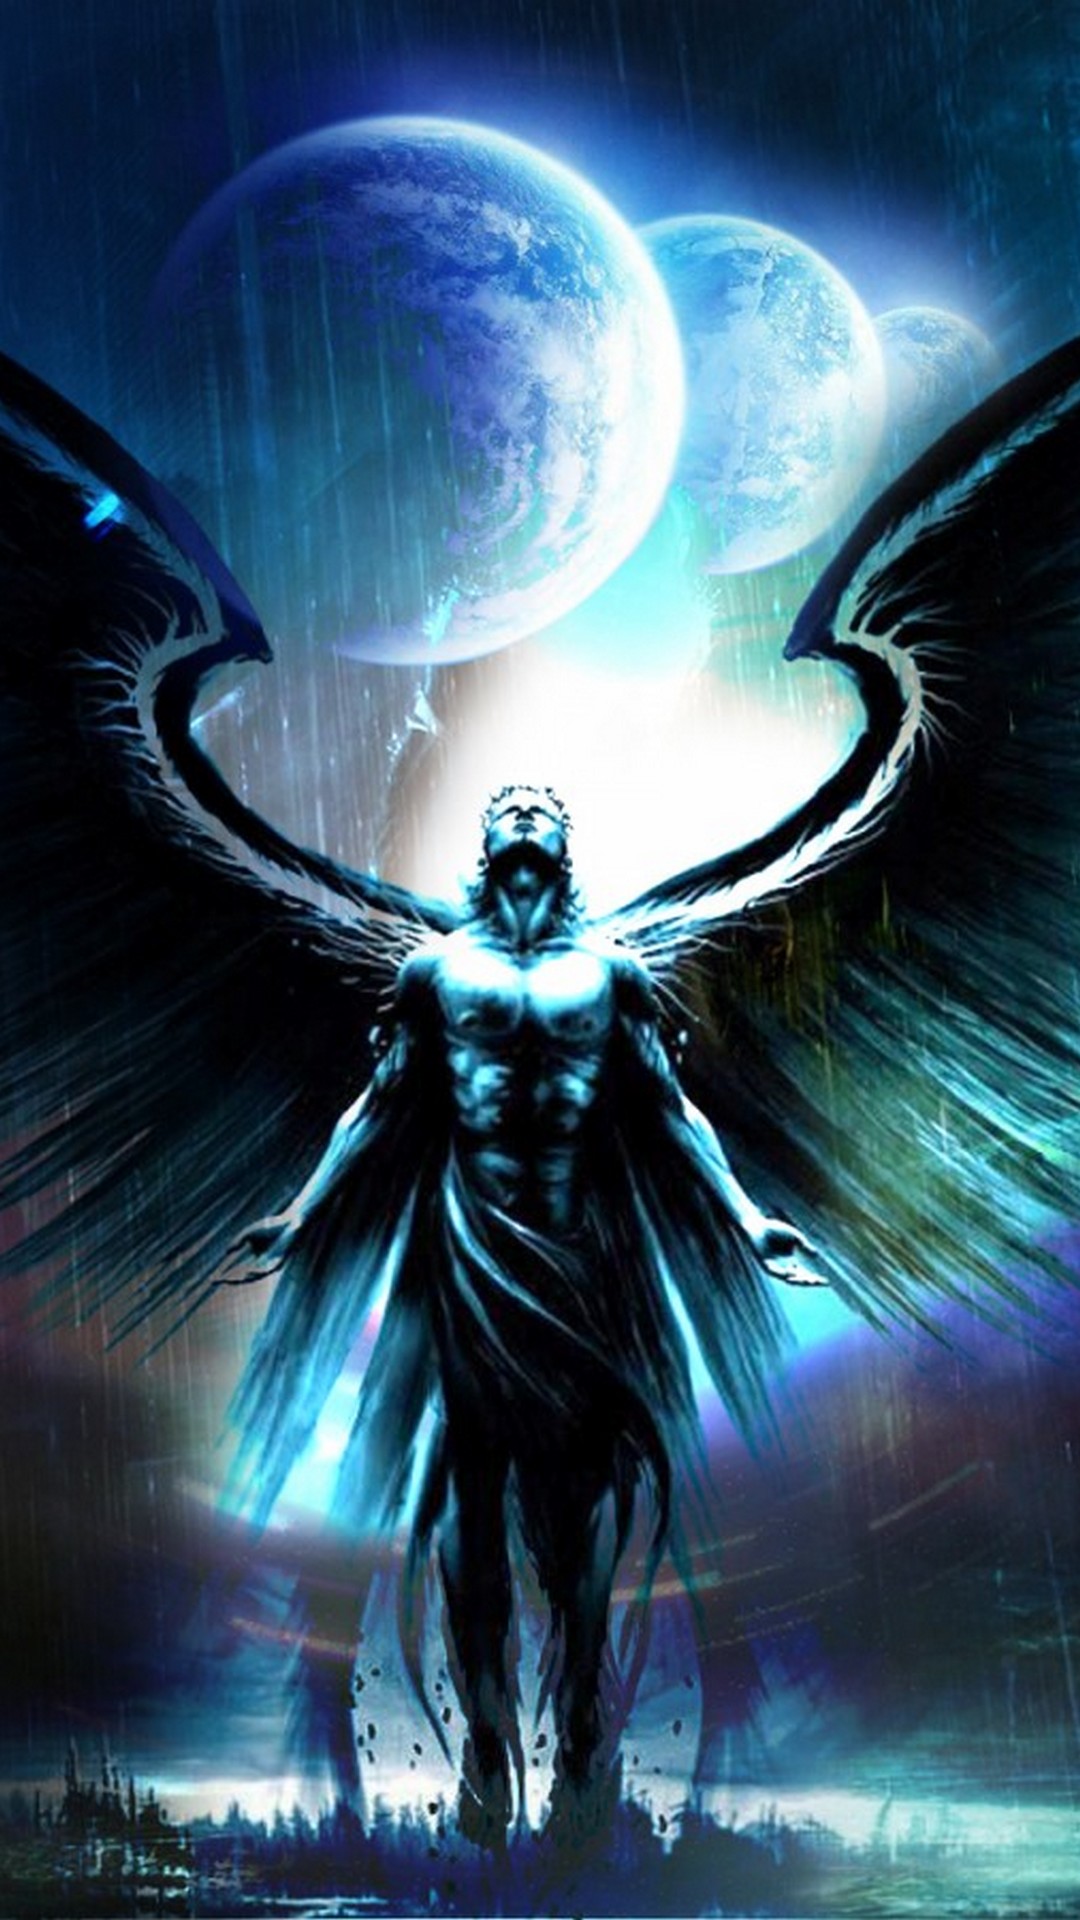 Dark Angel Wallpaper Android With high-resolution 1080X1920 pixel. You can use this wallpaper for your Android backgrounds, Tablet, Samsung Screensavers, Mobile Phone Lock Screen and another Smartphones device